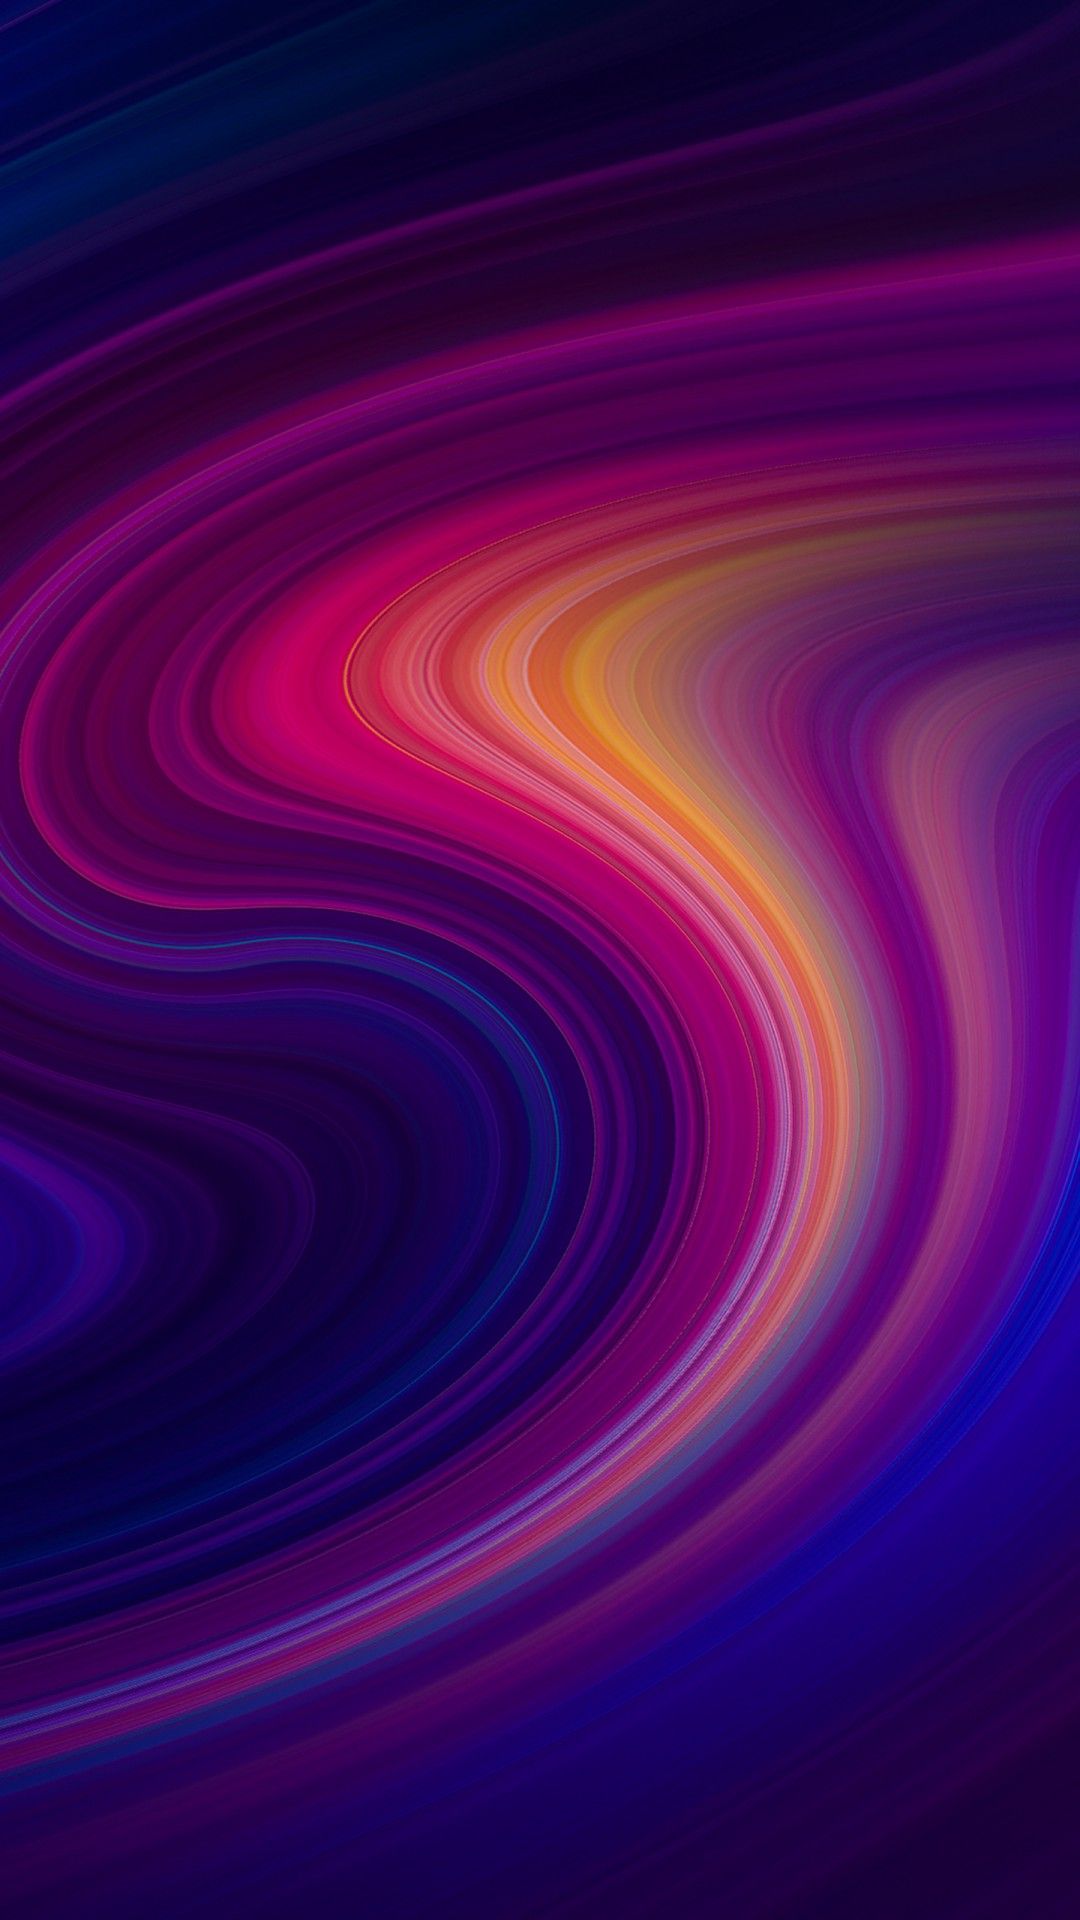 Pink And Yellow Abstract Swirl 4K HD Wallpaper